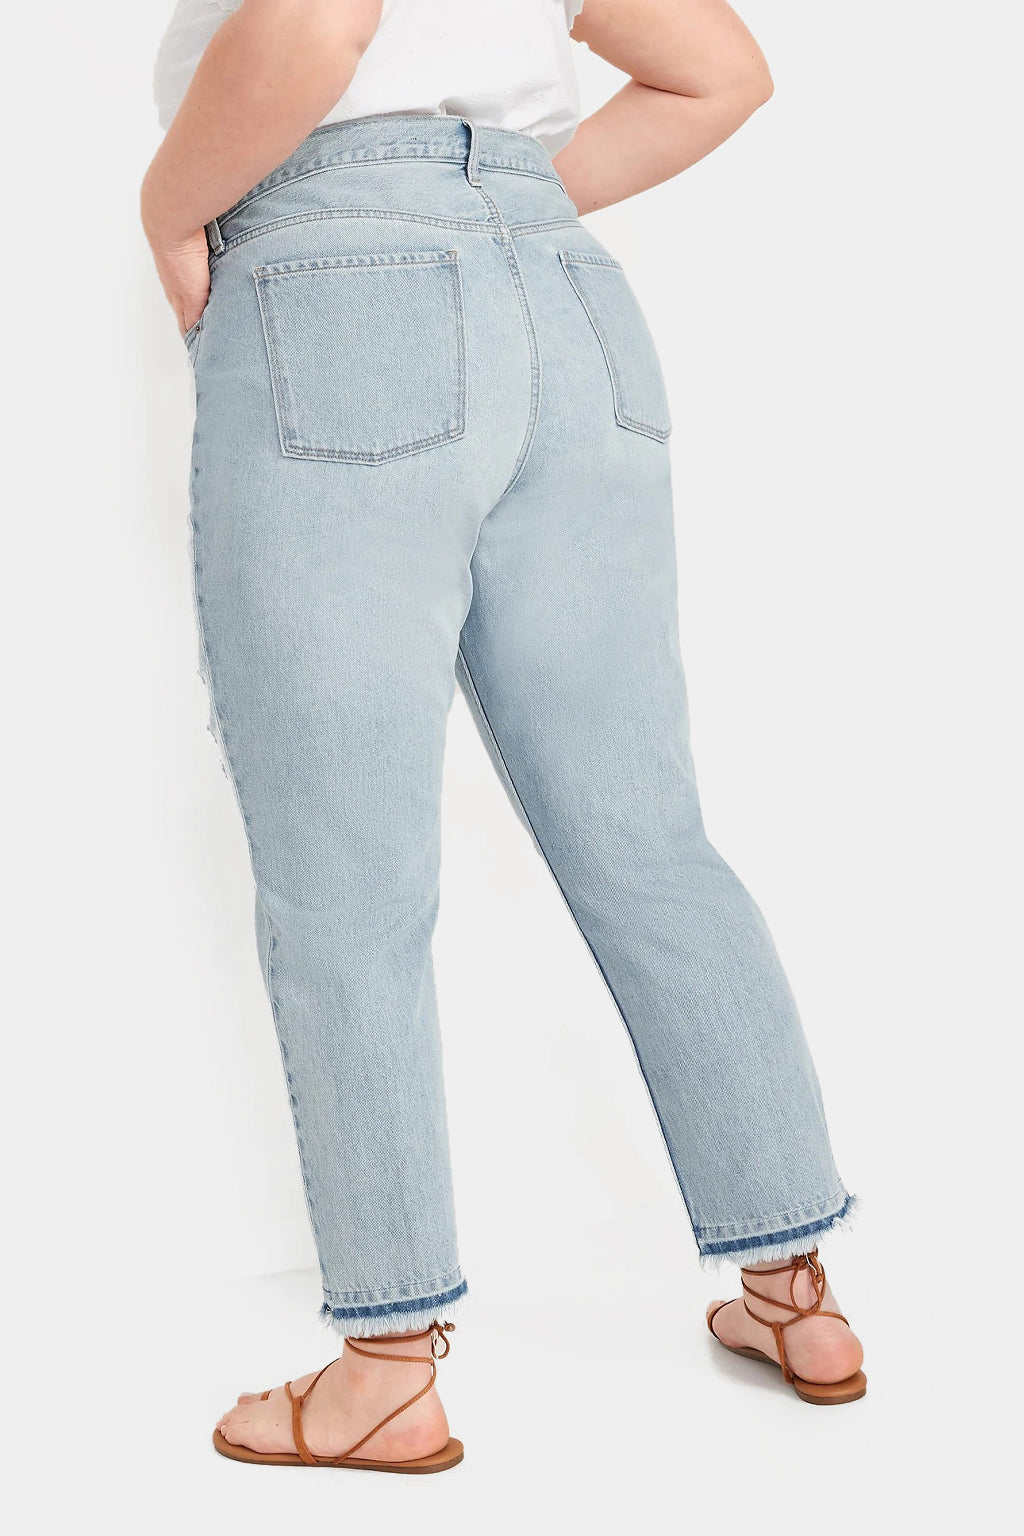 Old Navy - High-Waisted Slouchy Straight Distressed Cut-Off Non-Stretch Jeans for Women